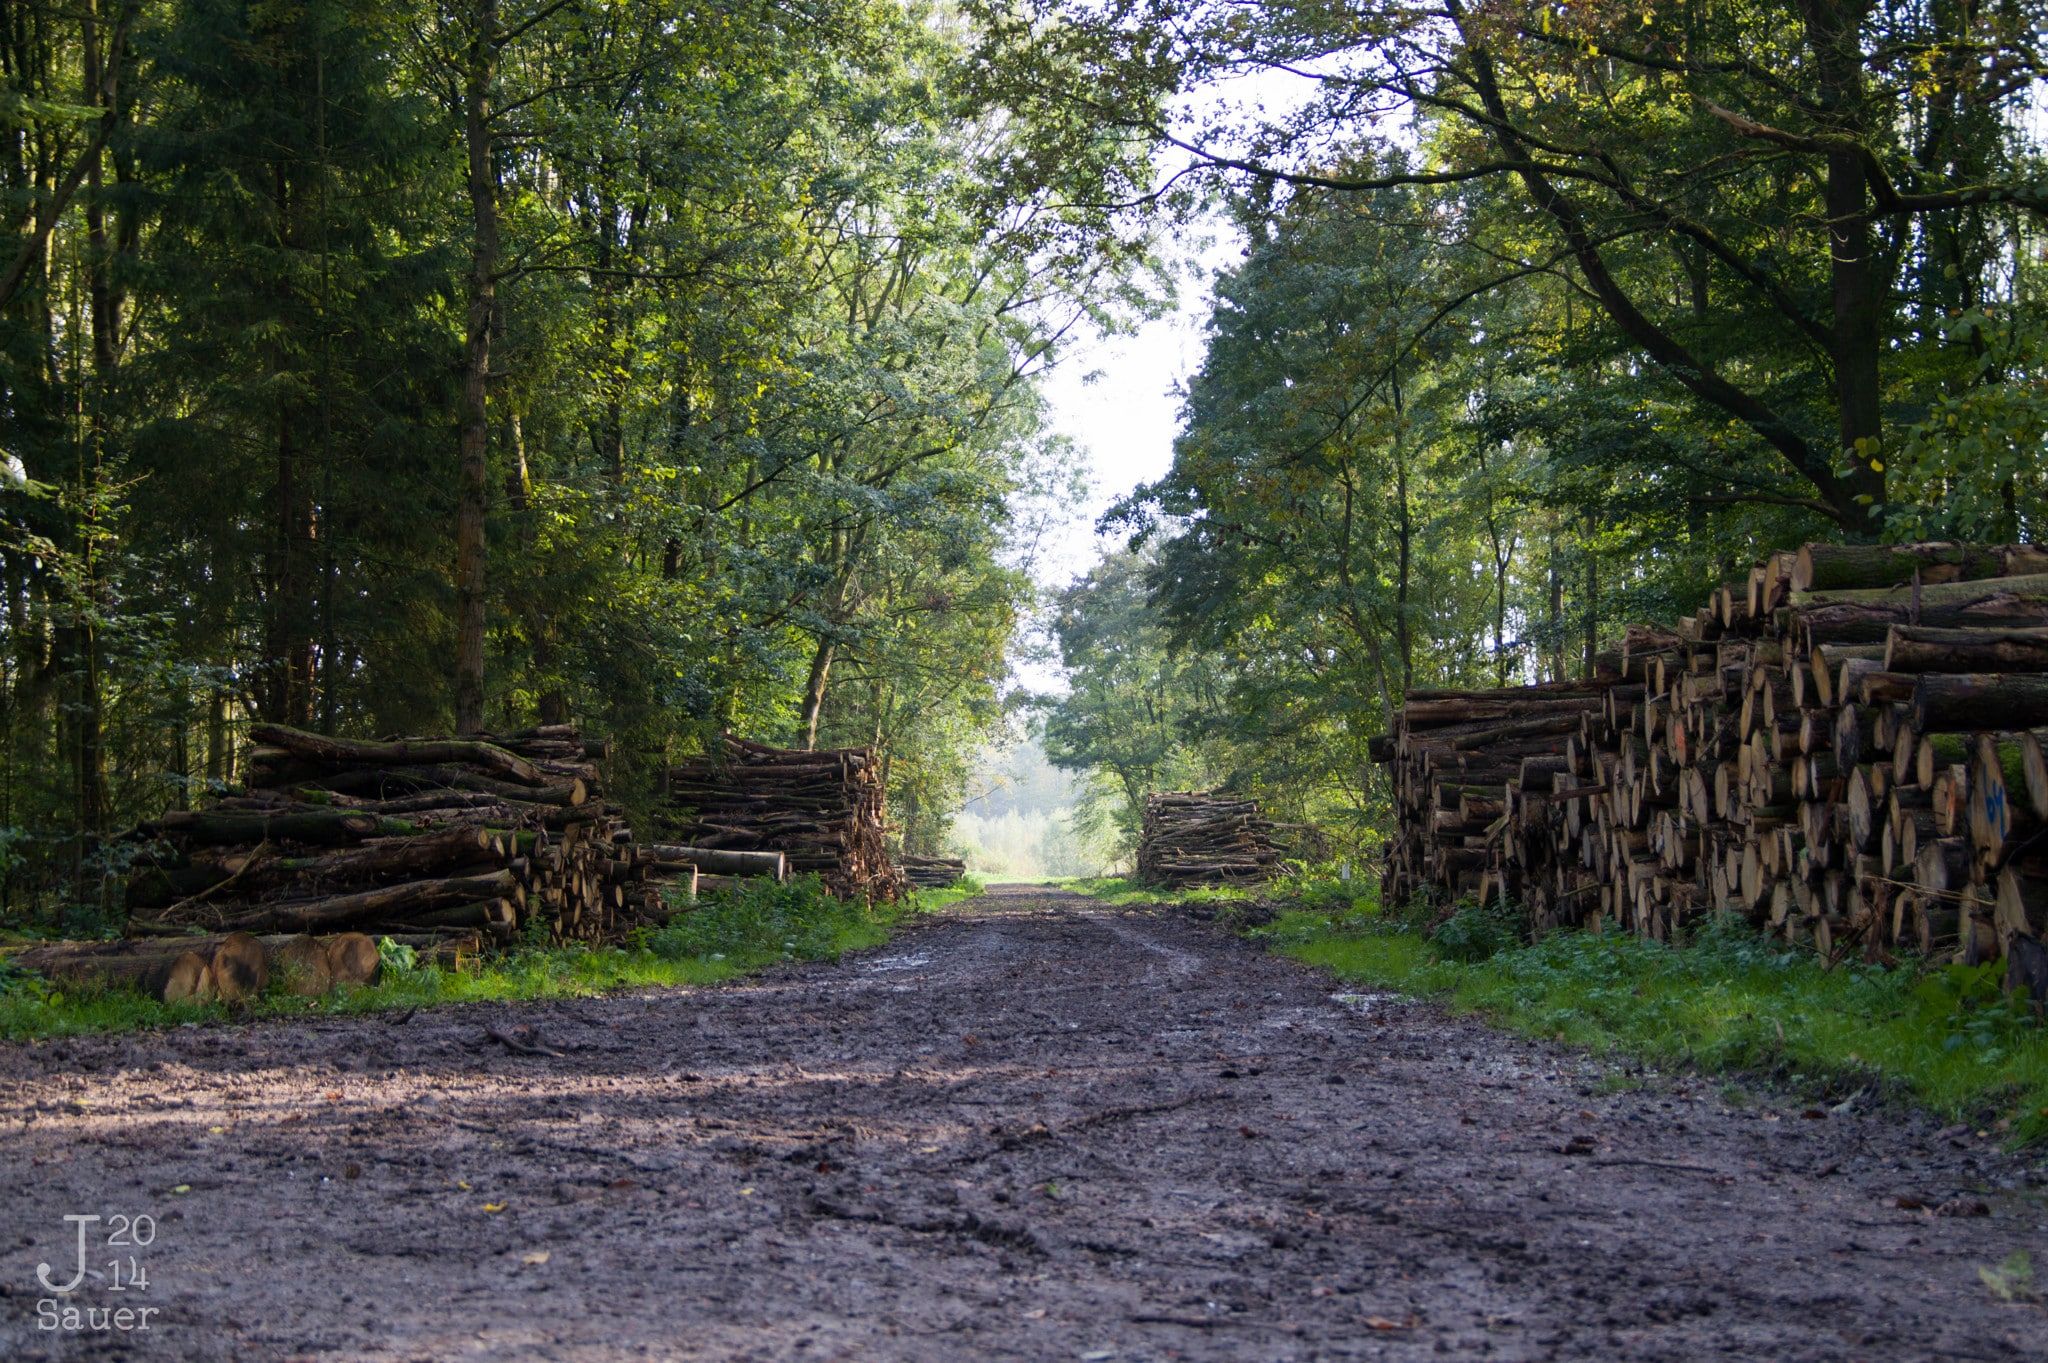 Forest path lined with logs